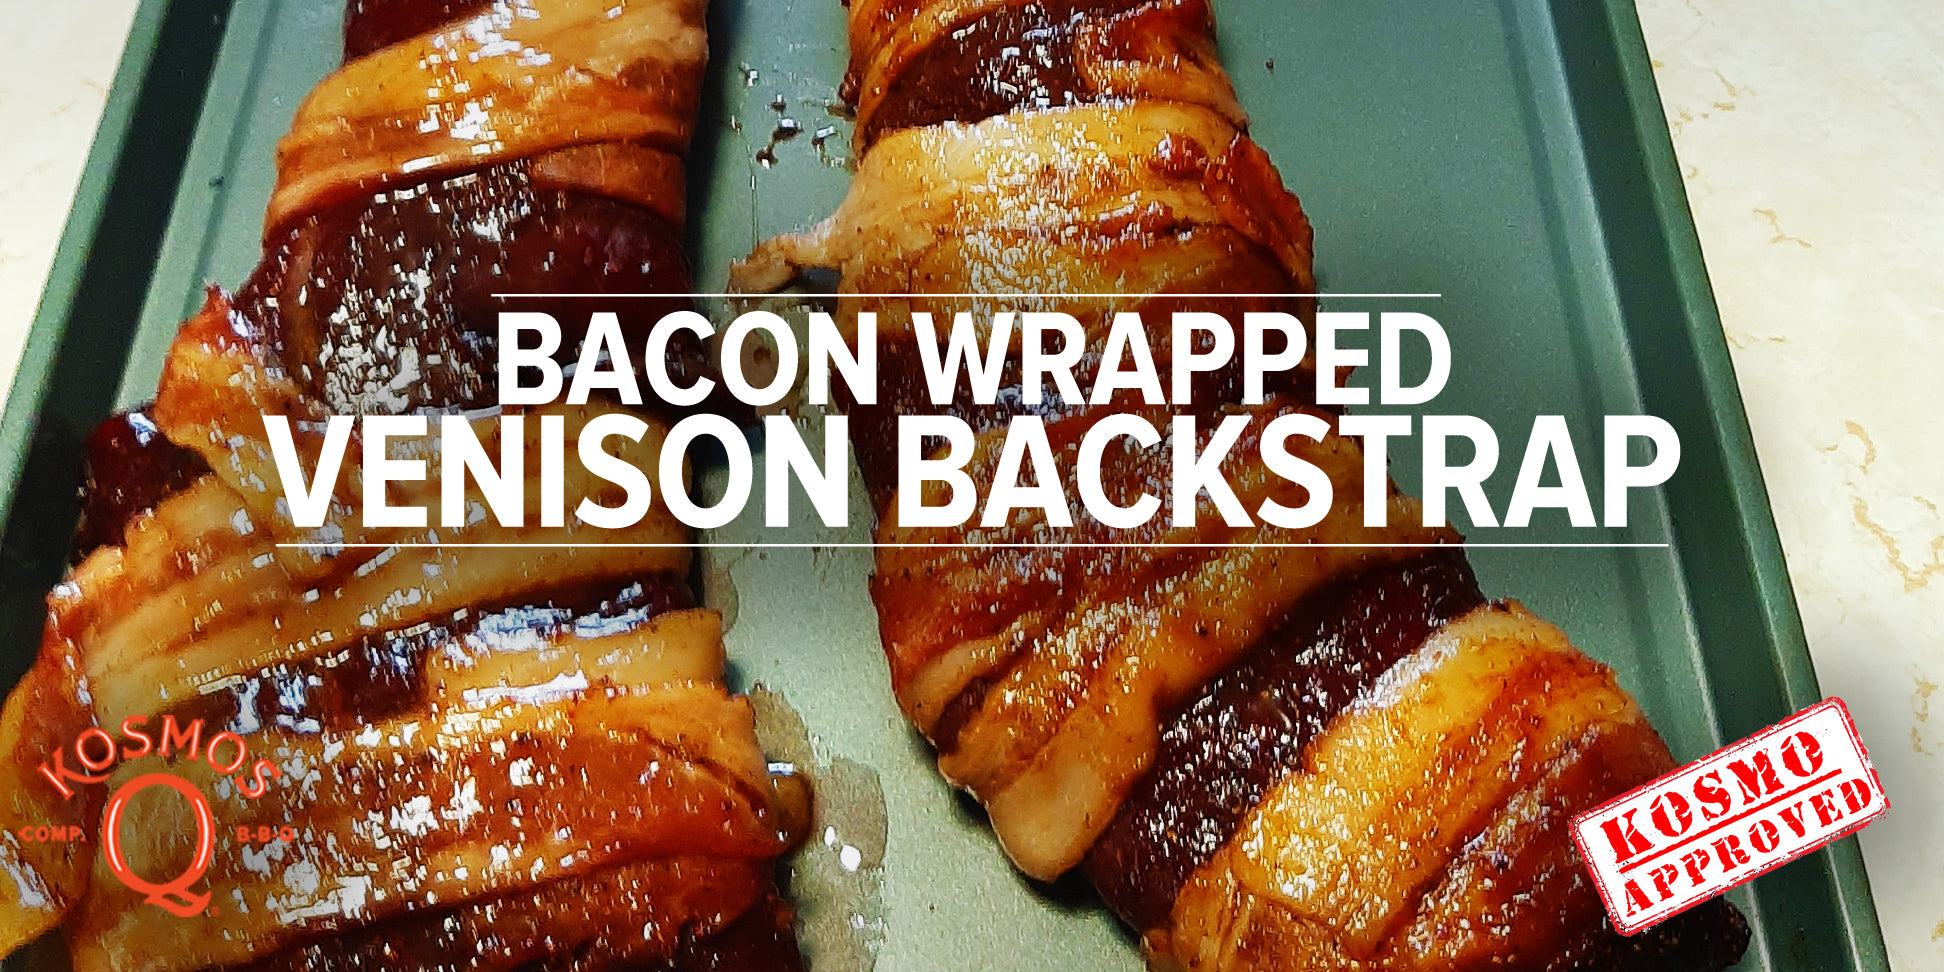 Bacon Wrapped Venison Backstrap - Kosmos Q BBQ Products & Supplies